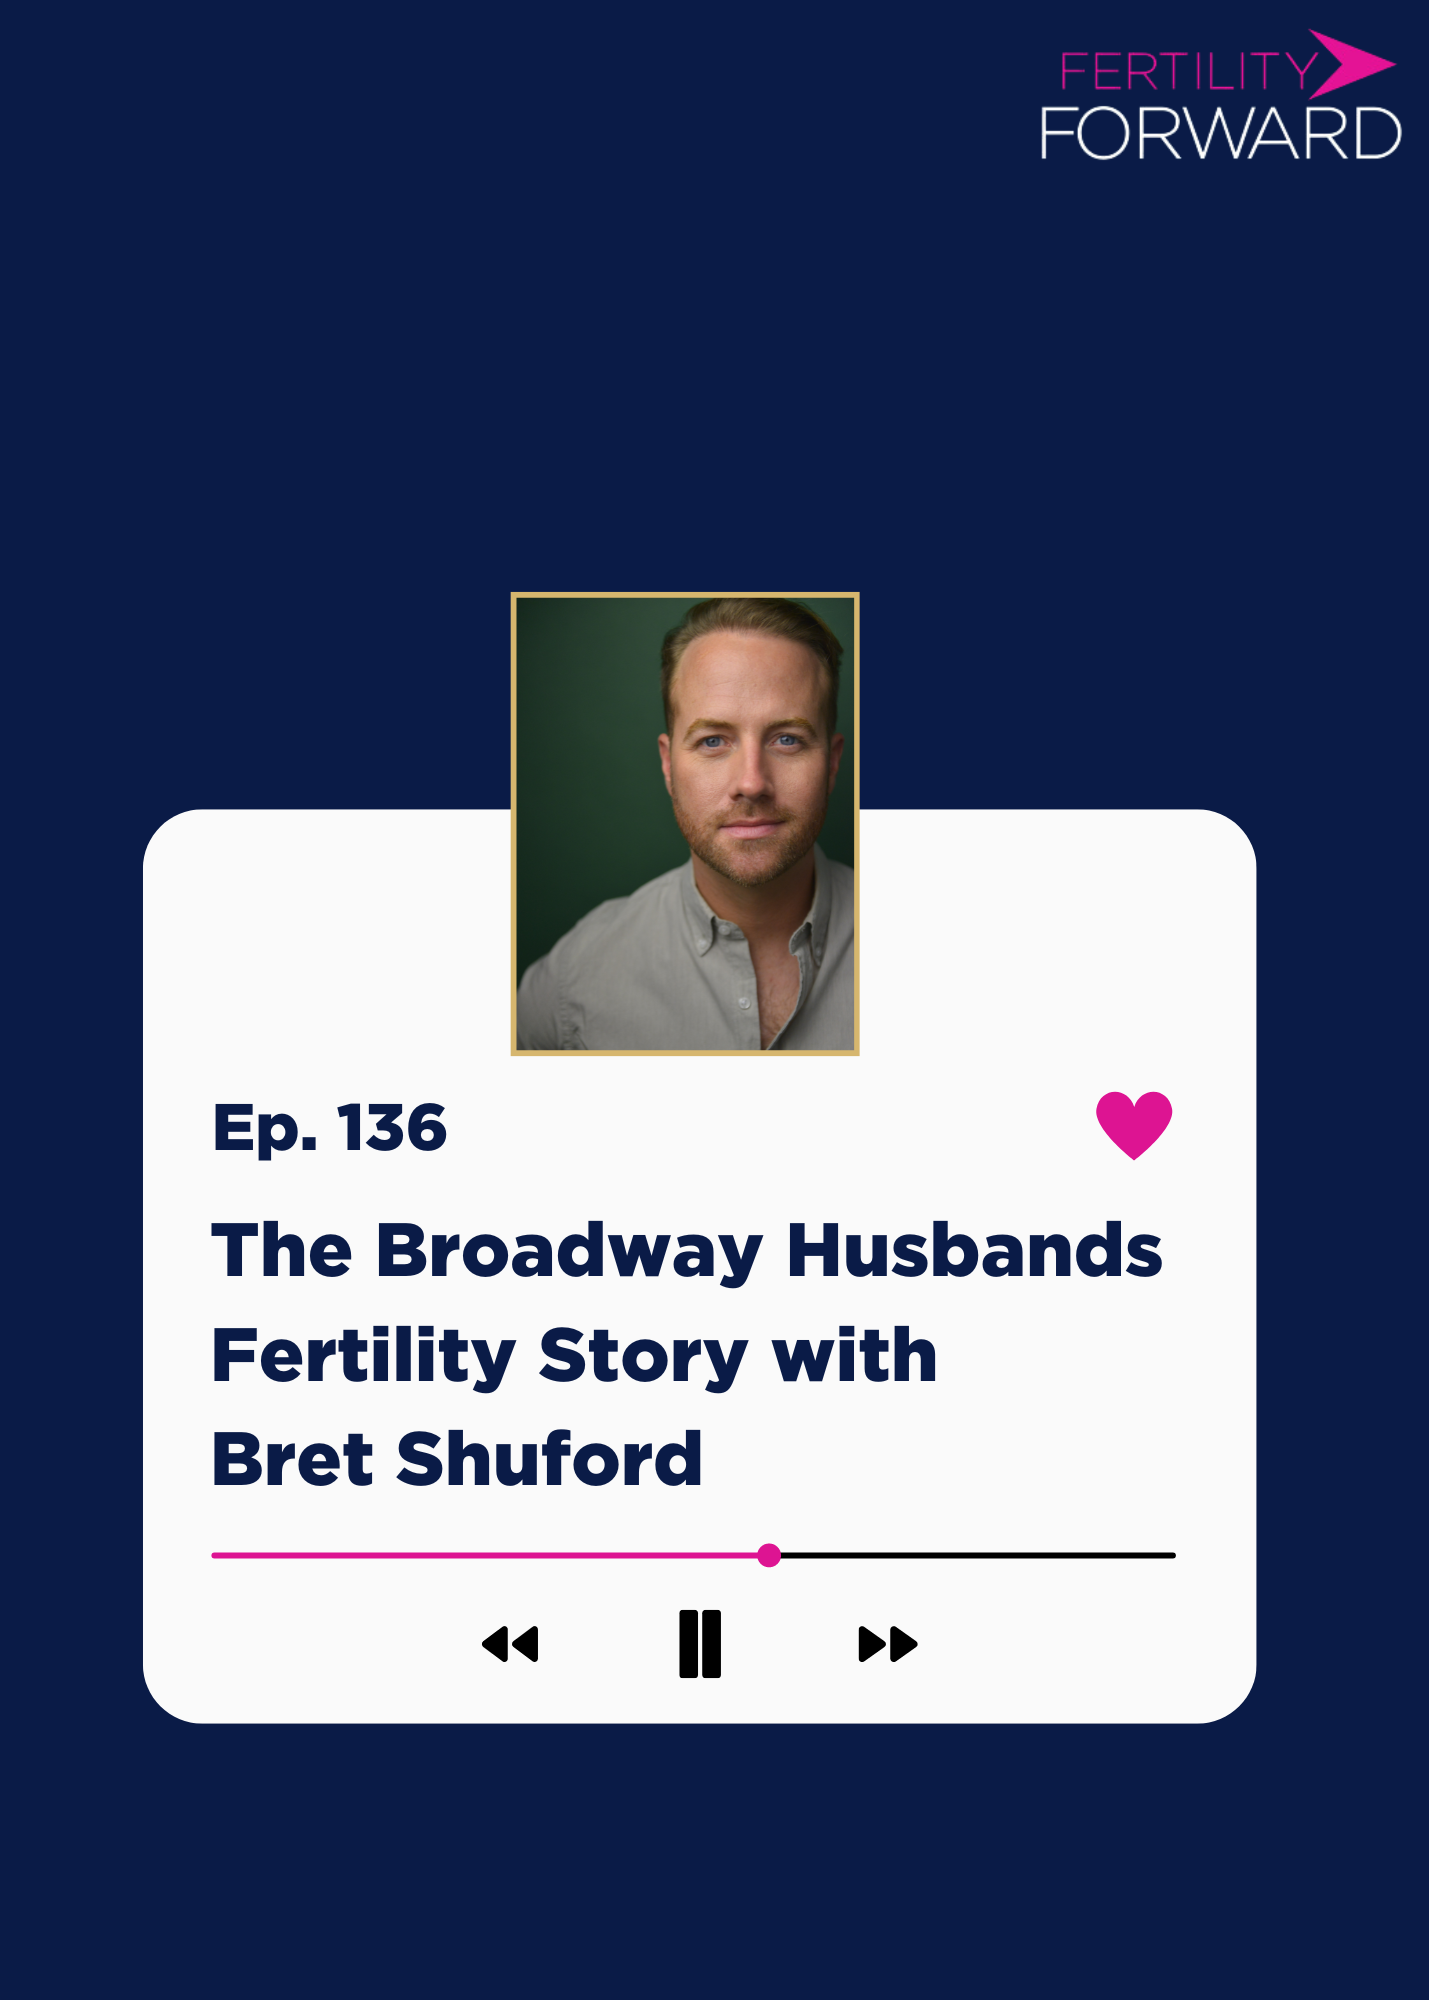 Ep 136: The Broadway Husbands Fertility Story with Bret Shuford